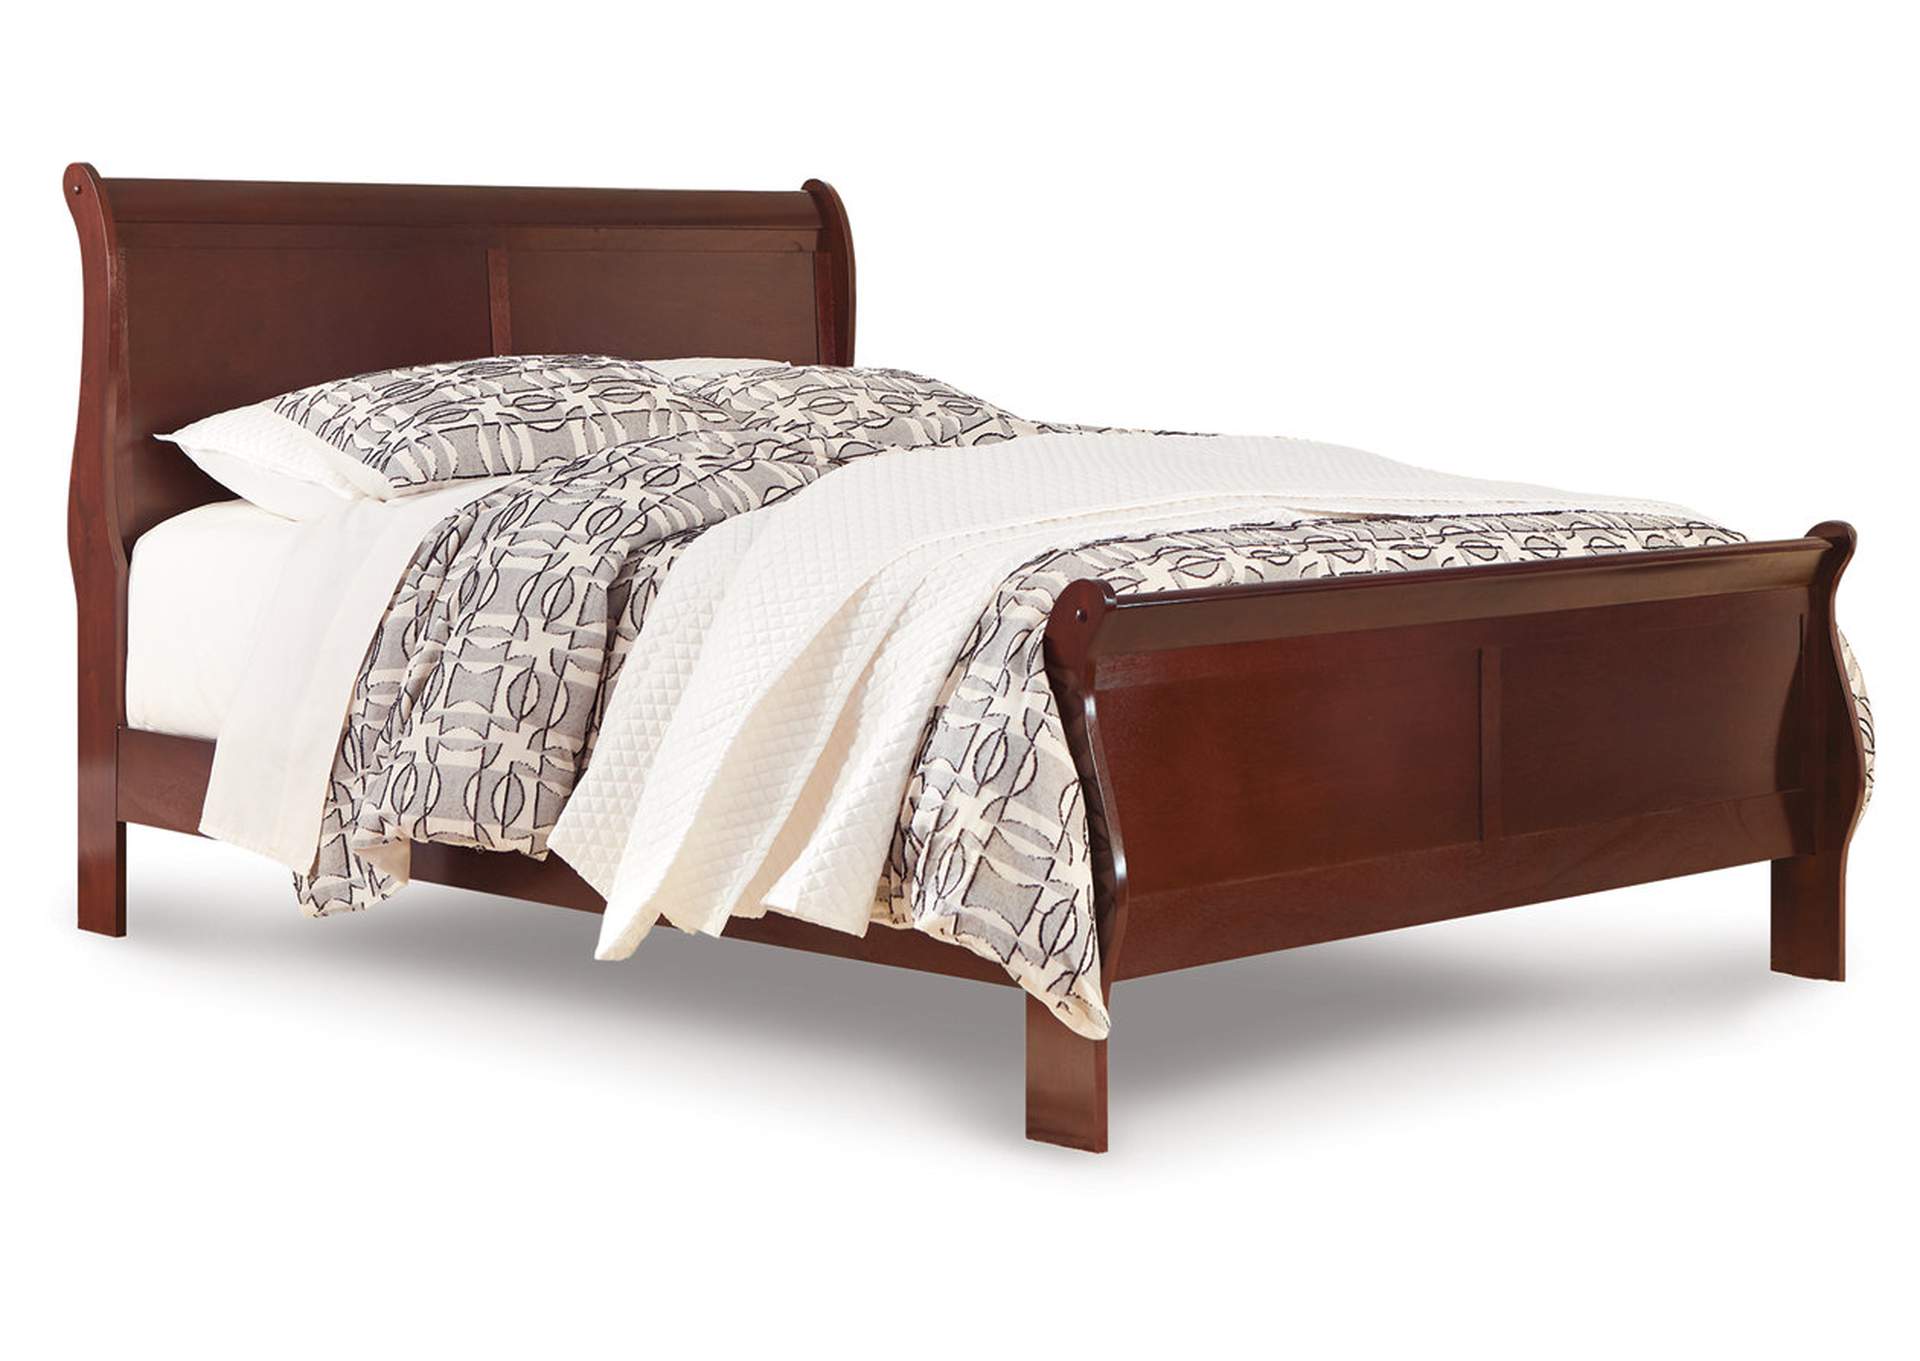 Alisdair California King Sleigh Bed with Mirrored Dresser and Chest,Signature Design By Ashley